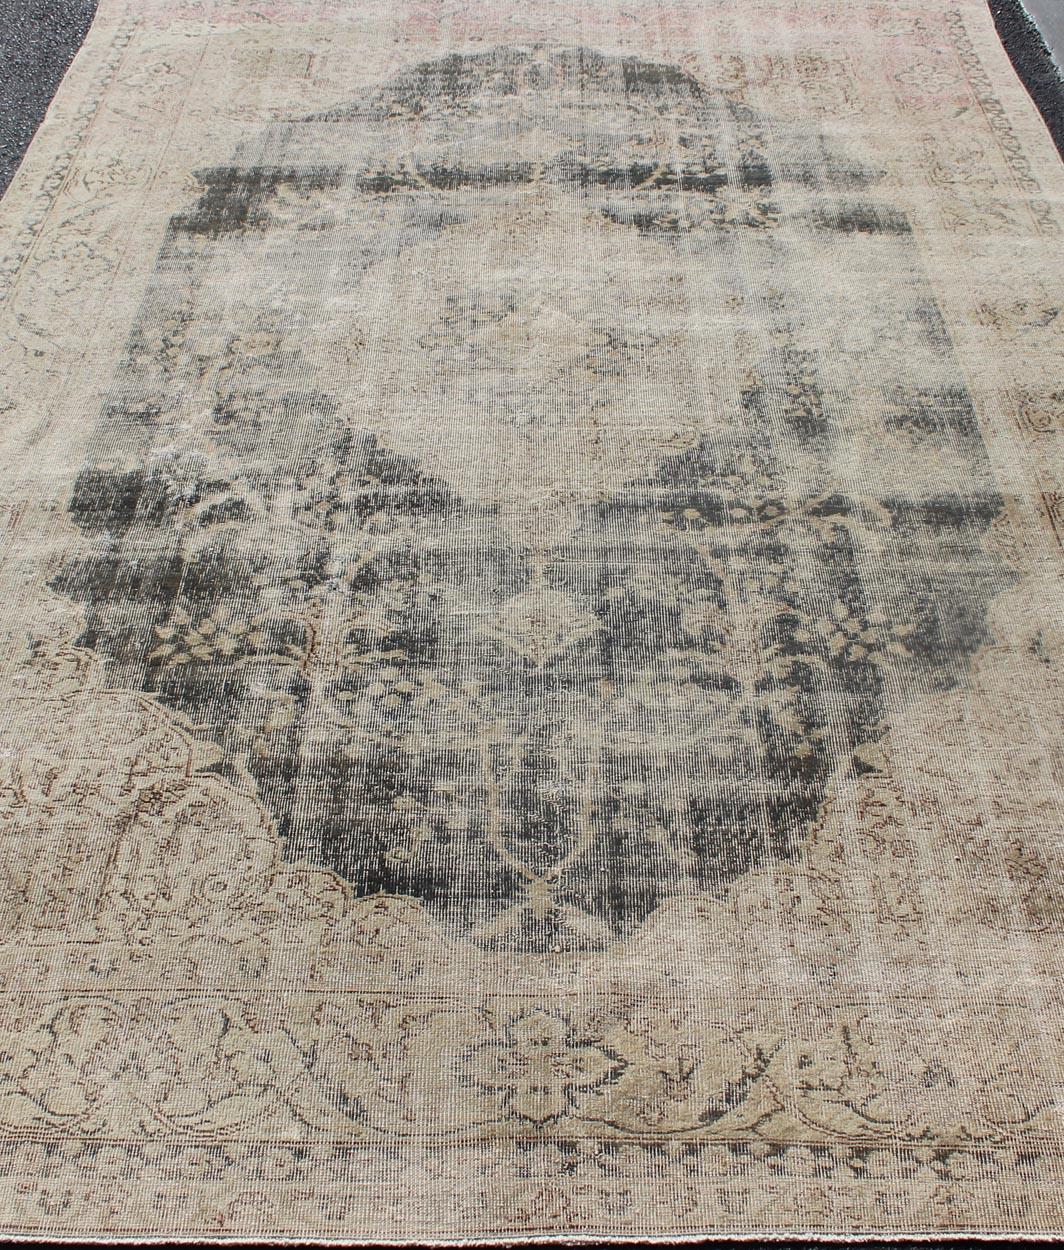 Distressed Turkish Carpet with Floral Design in Taupe, Dark Gray, and Charcoal For Sale 4